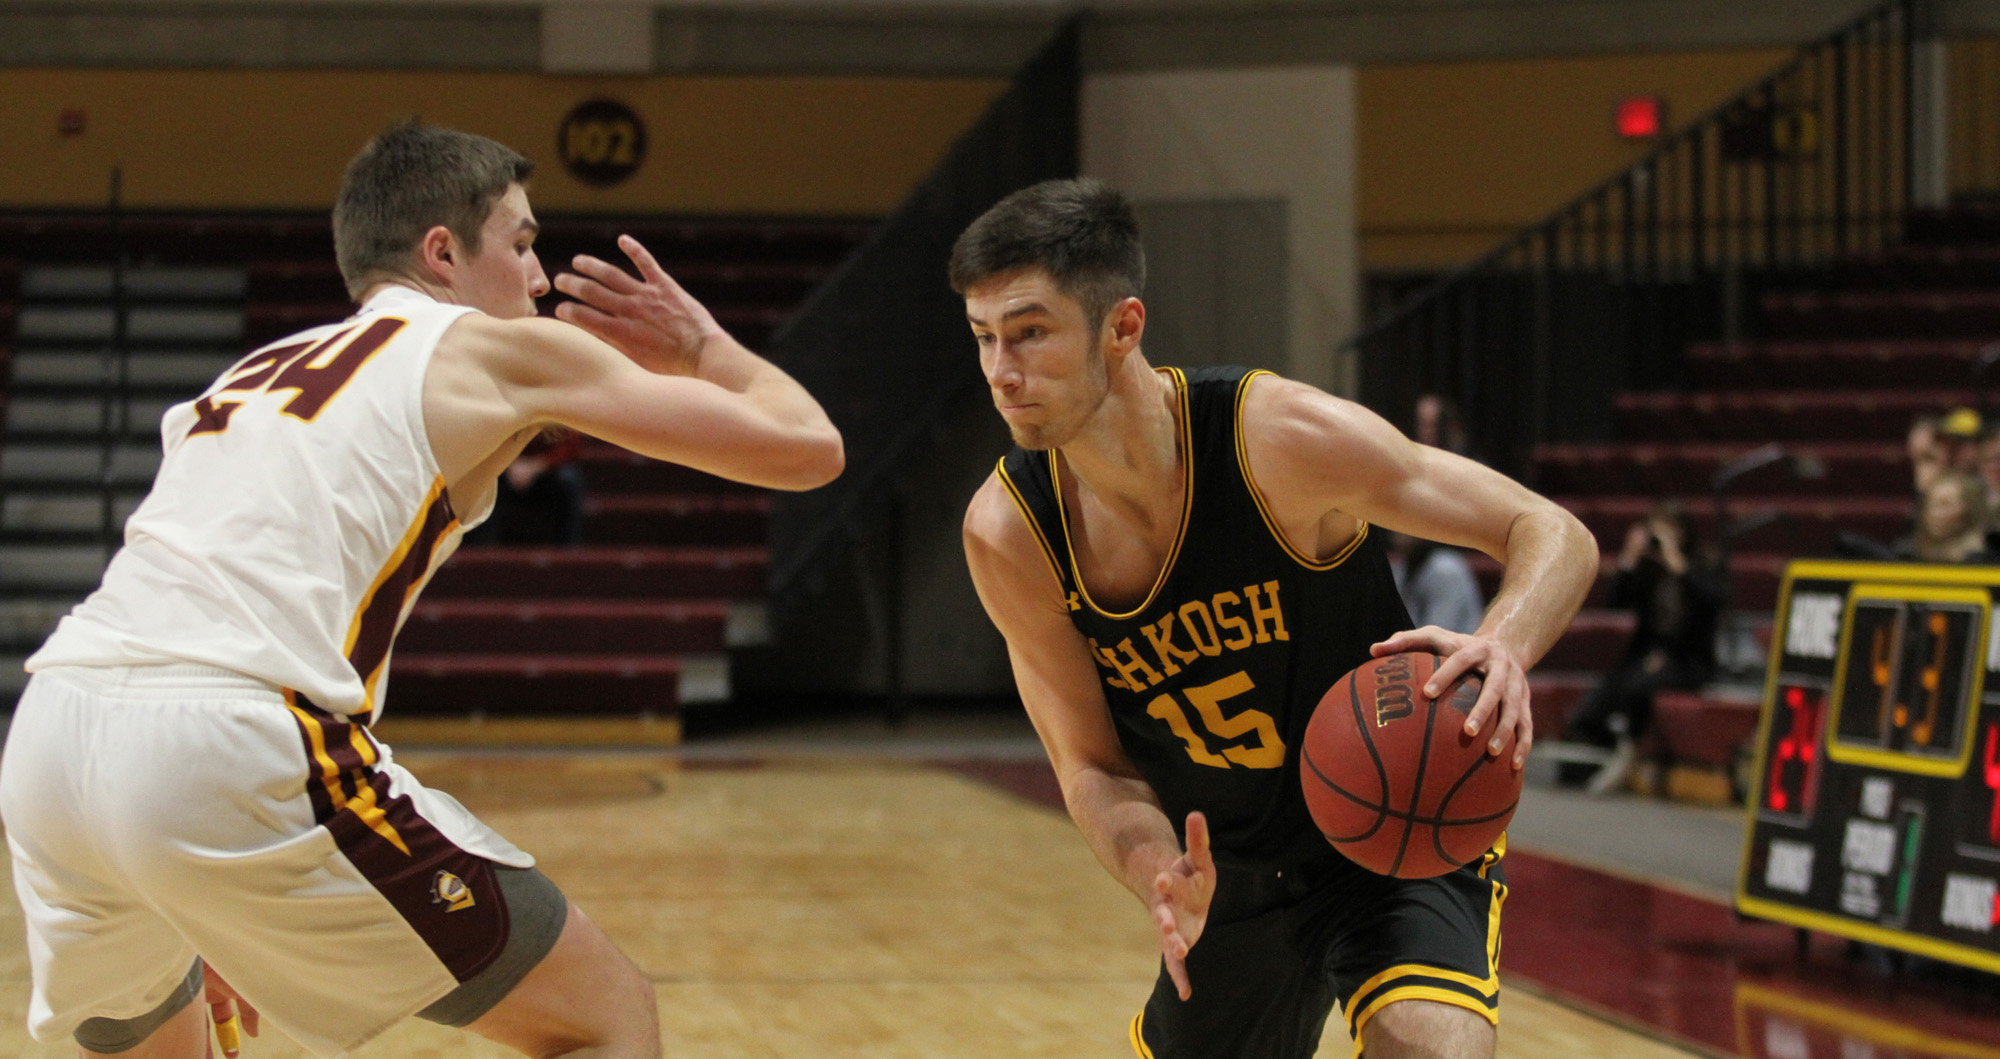 Adam Fravert scored 22 points with nine rebounds and four assists against the Knights.